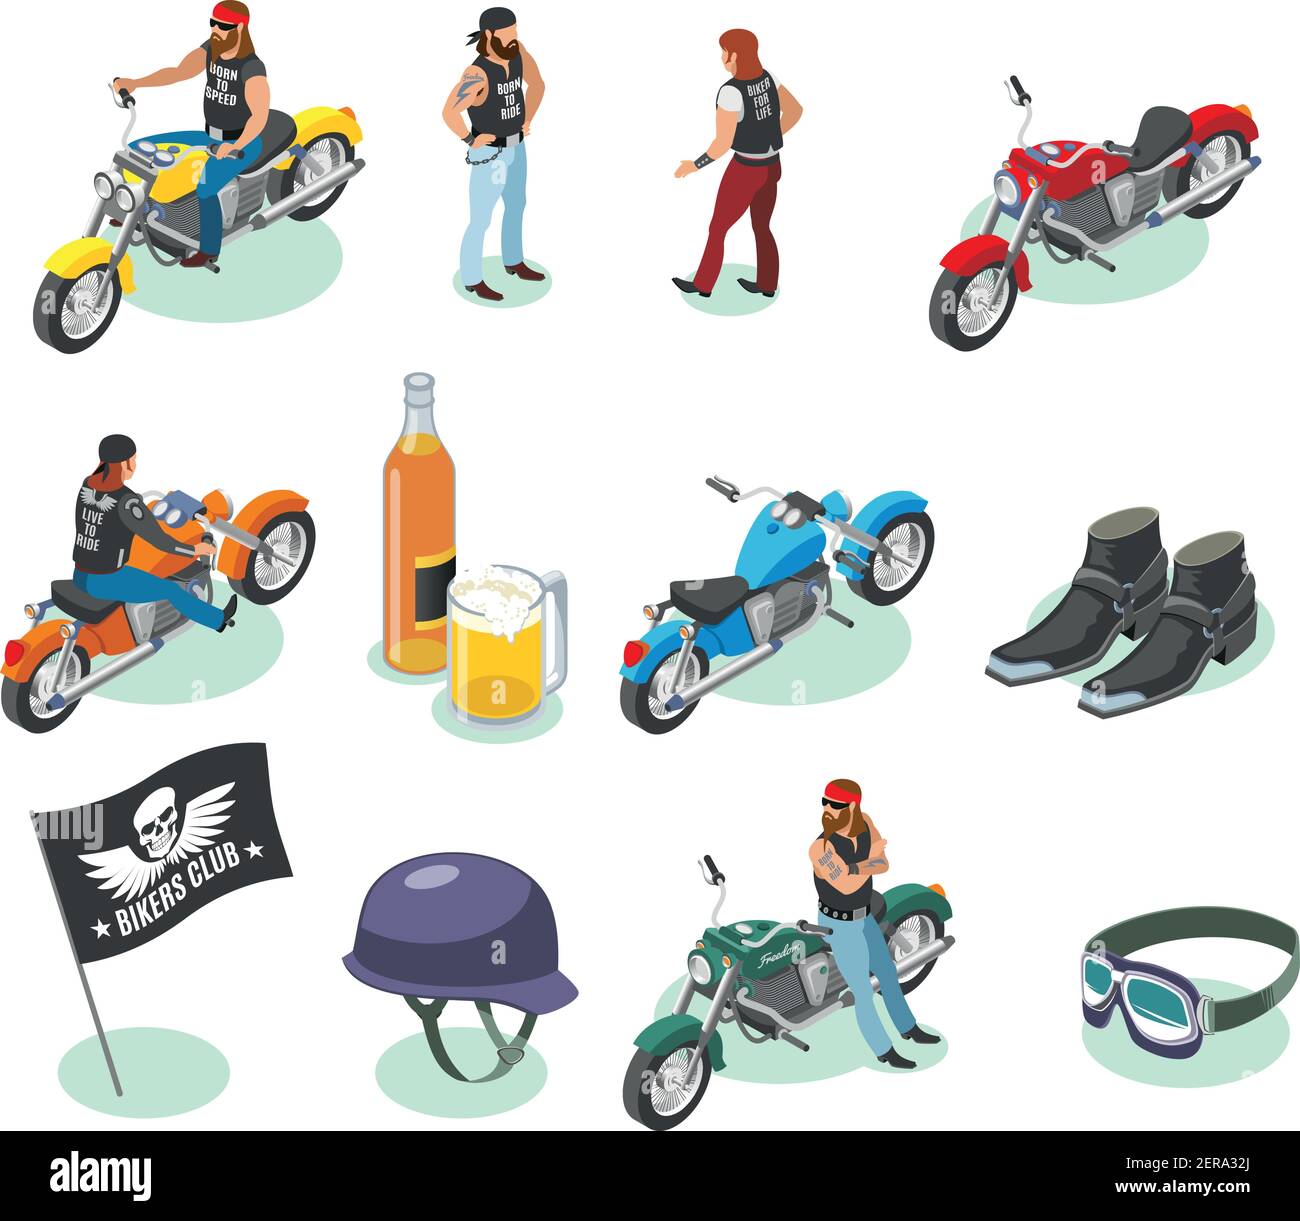 Bikers isometric icons collection of isolated human characters and images of motorcycles beer and fashion items vector illustration Stock Vector